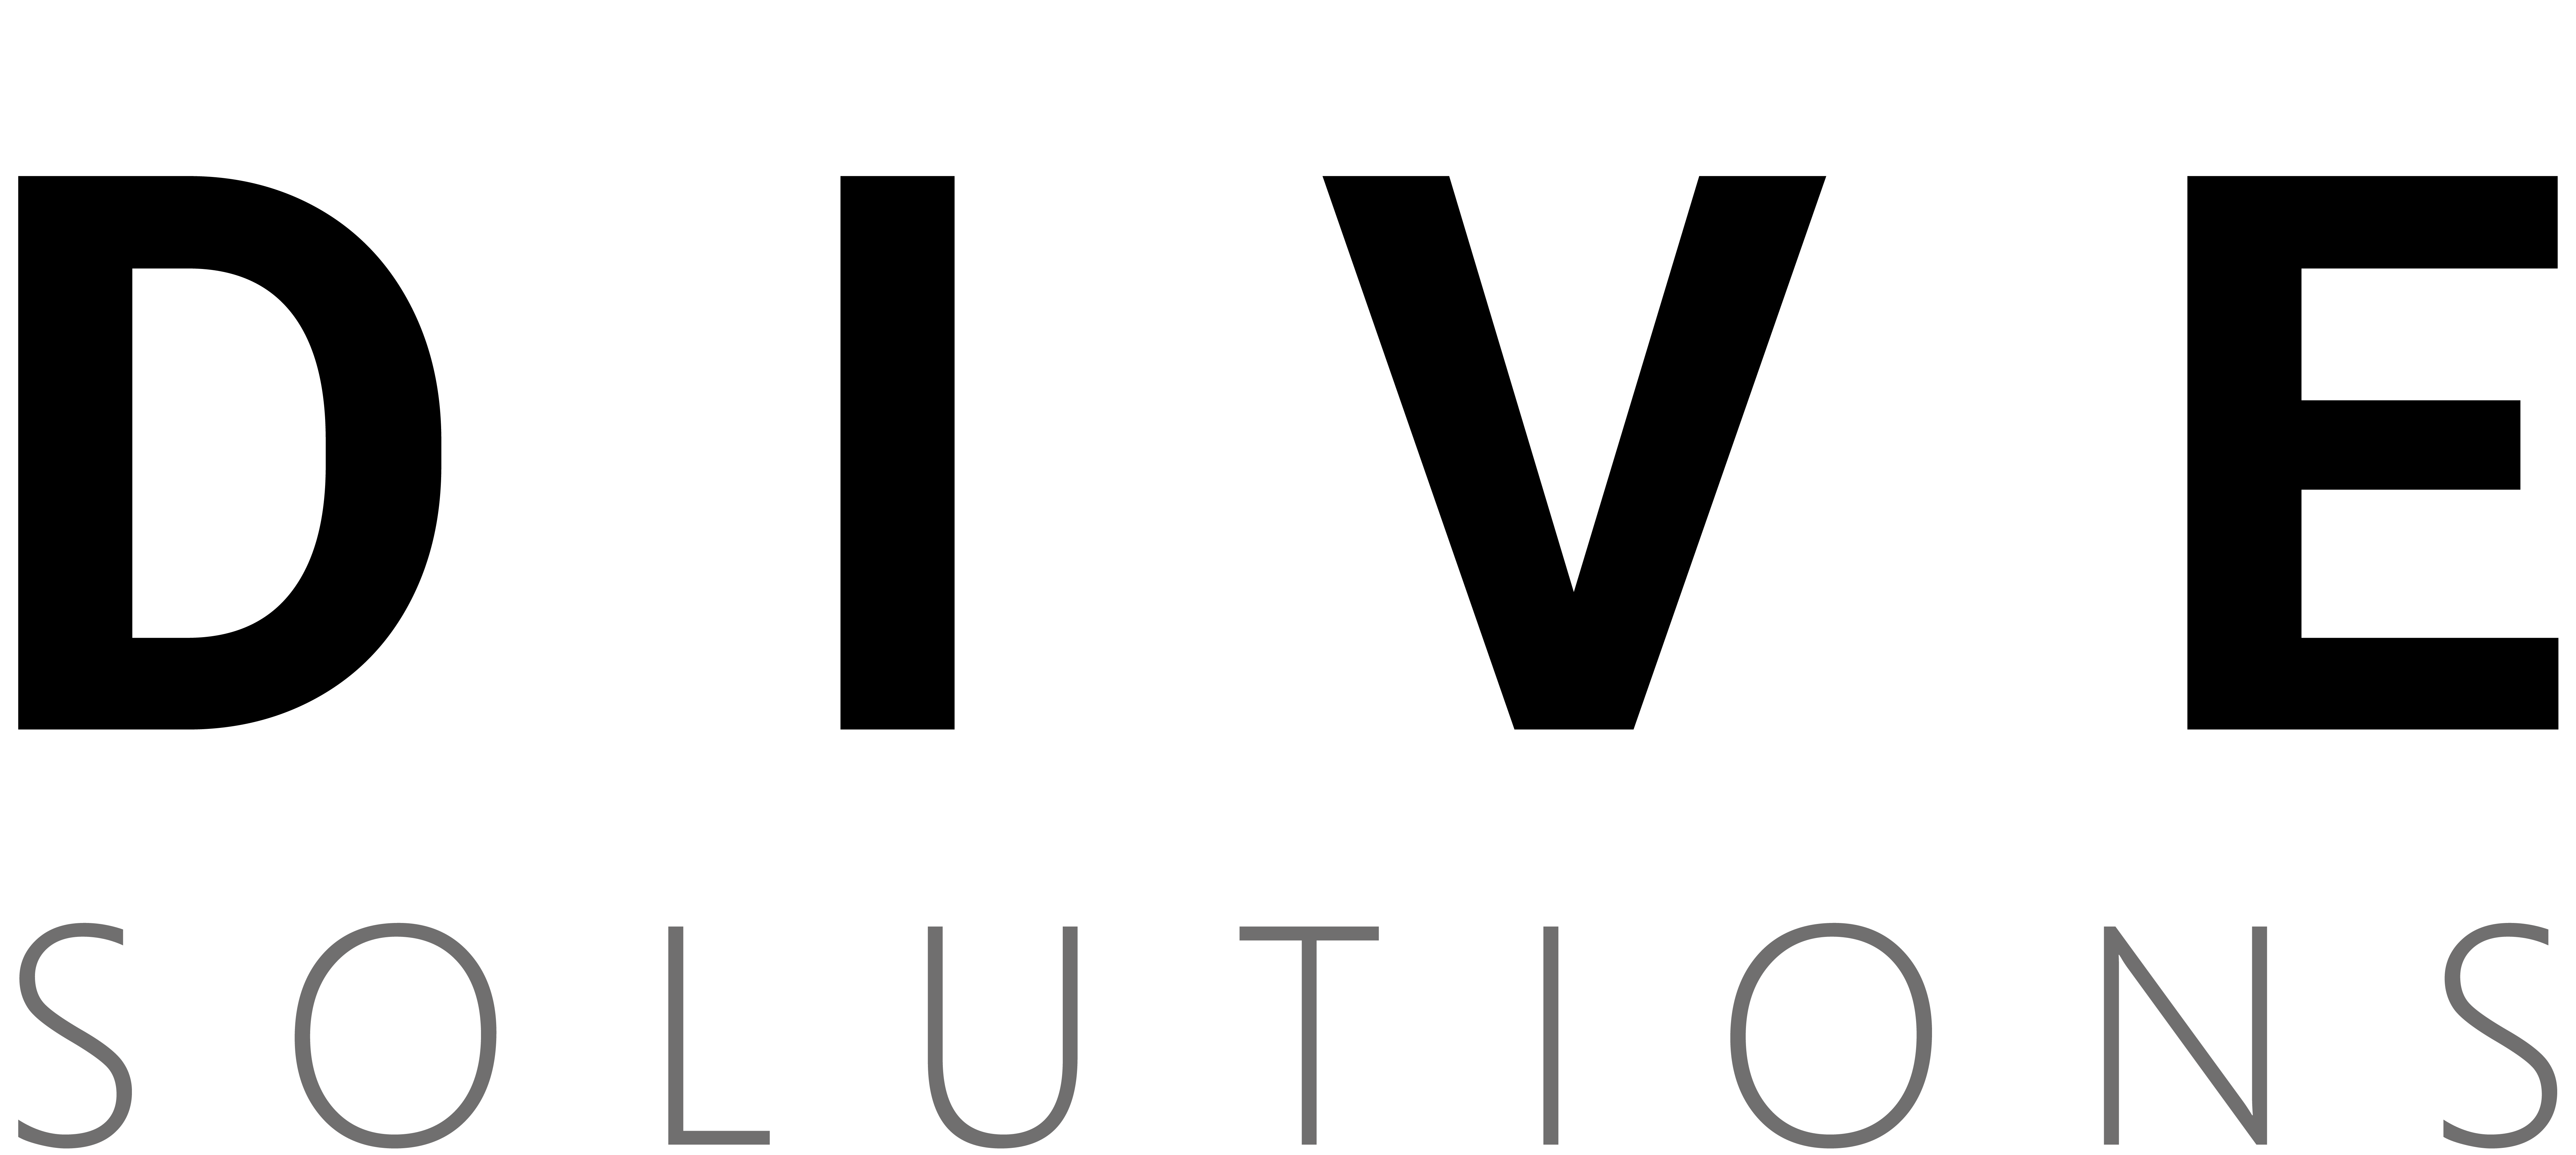 dive solutions GmbH